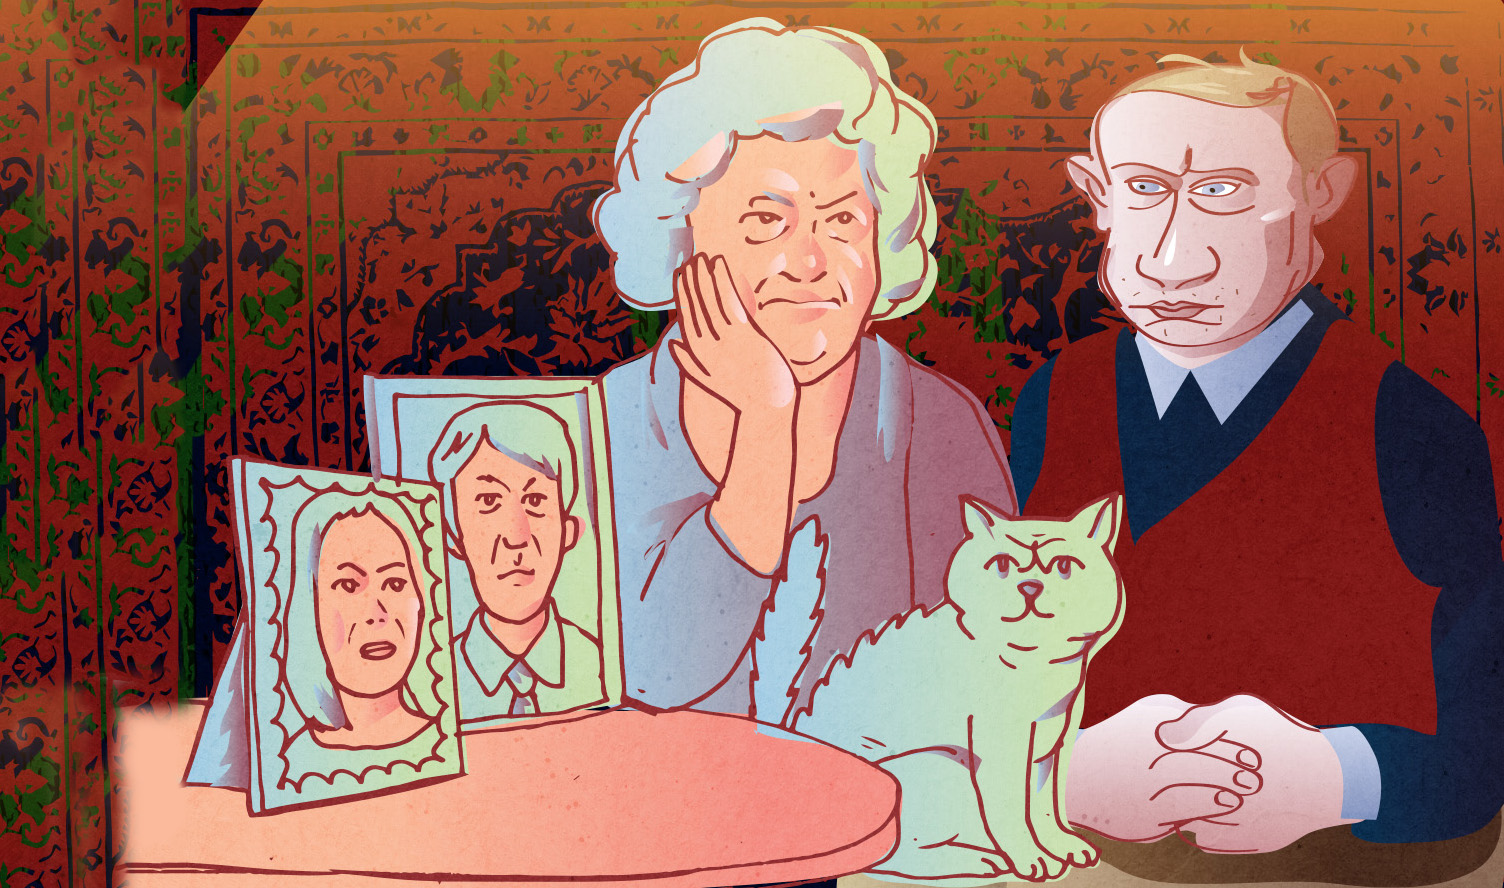 If Putin at 64 were the ordinary Russian: Married to his first wife (Image: OpenRussia.org)